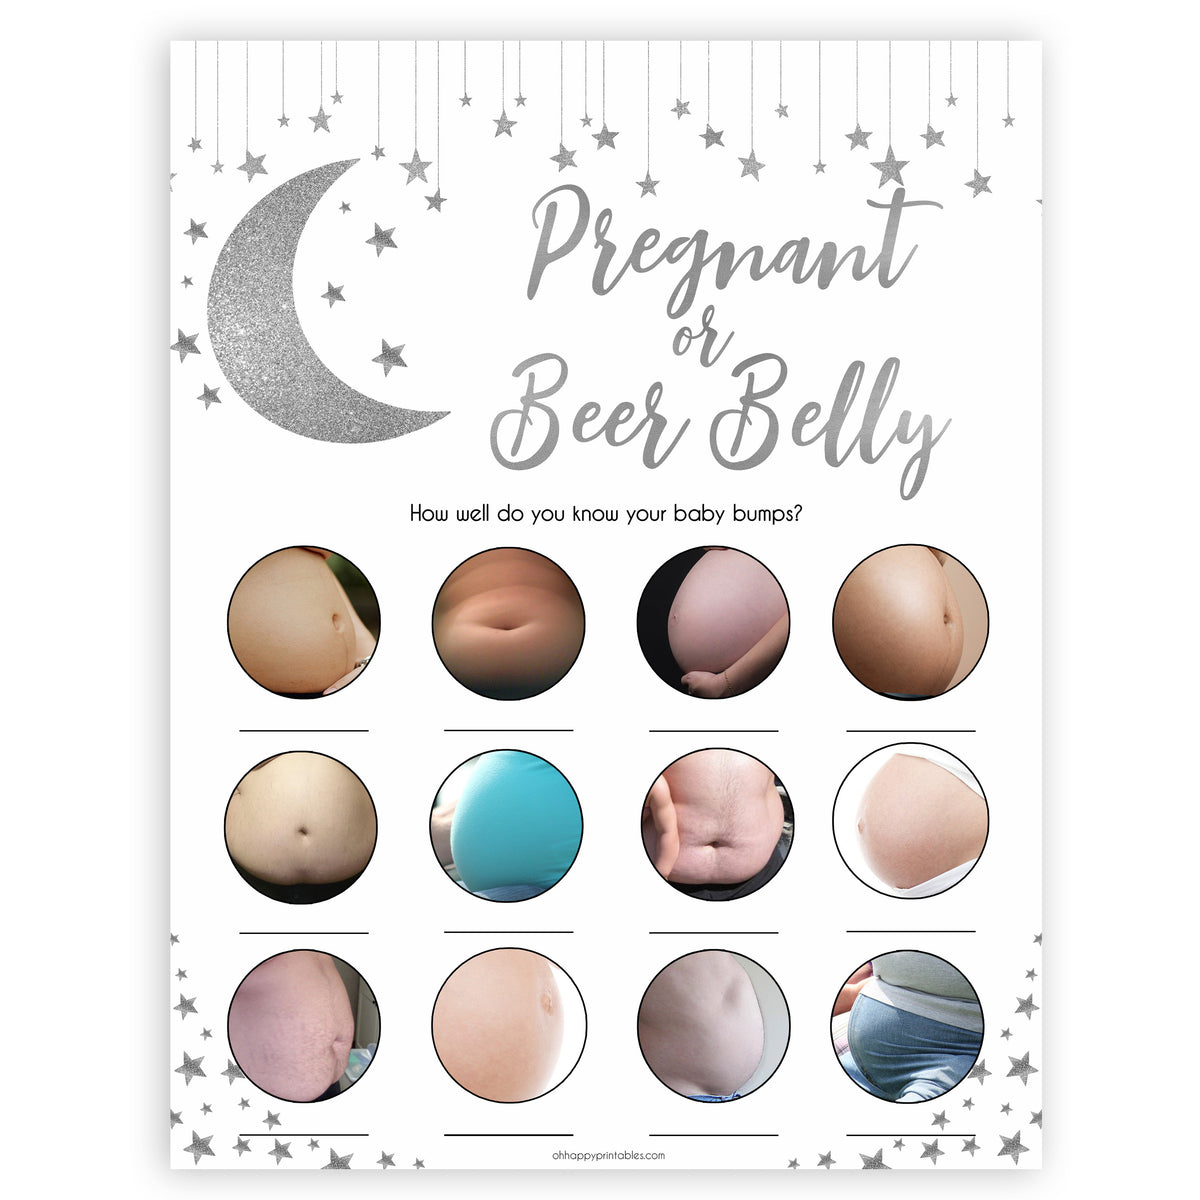 Silver little star, pregnant or beer belly baby games, baby shower games, printable baby games, fun baby games, twinkle little star games, baby games, fun baby shower ideas, baby shower ideas